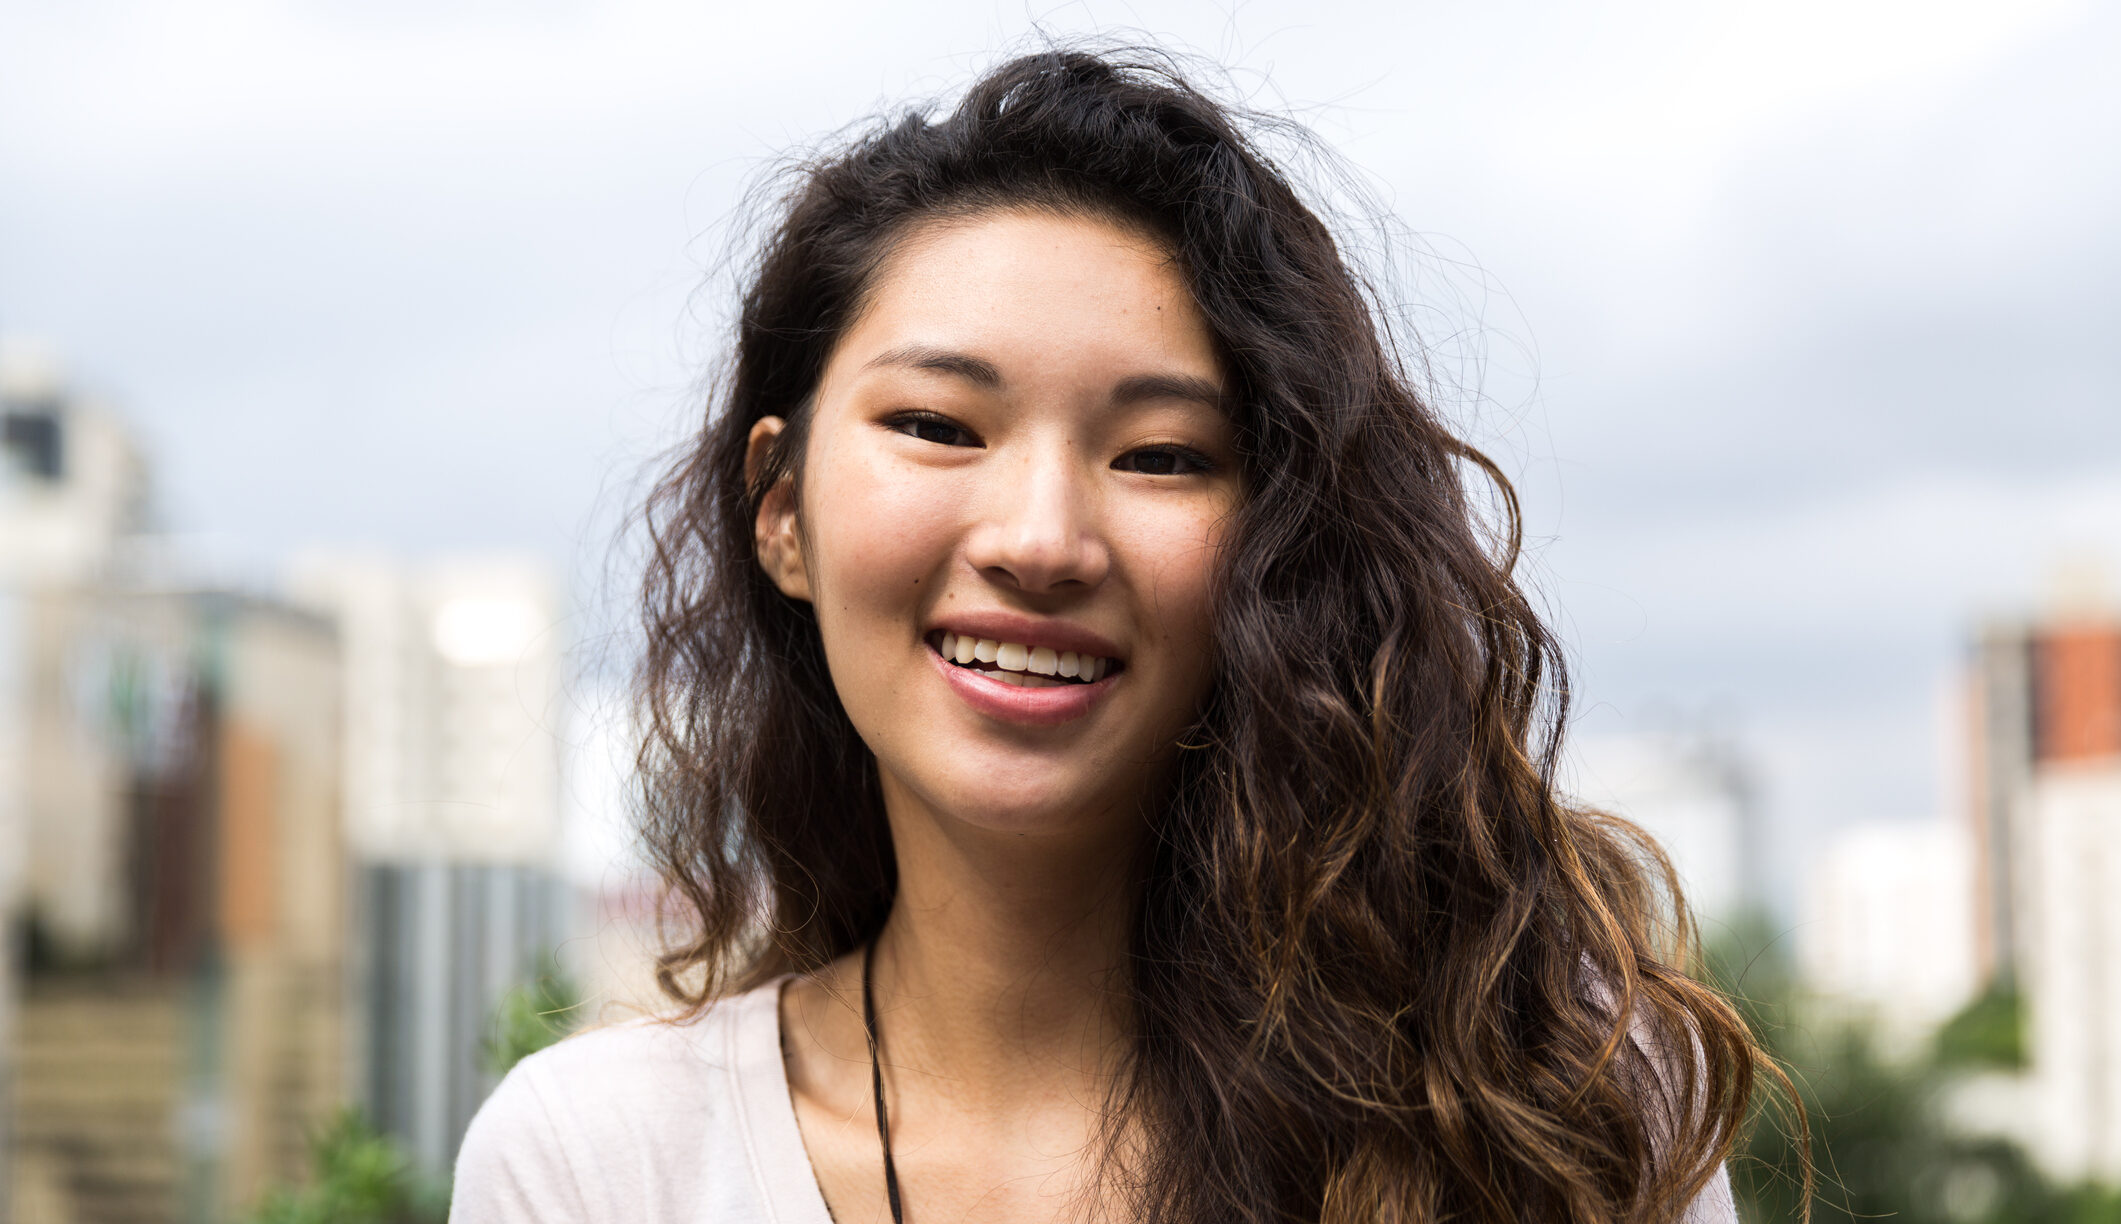 Portrait of an Asian Girl smiling